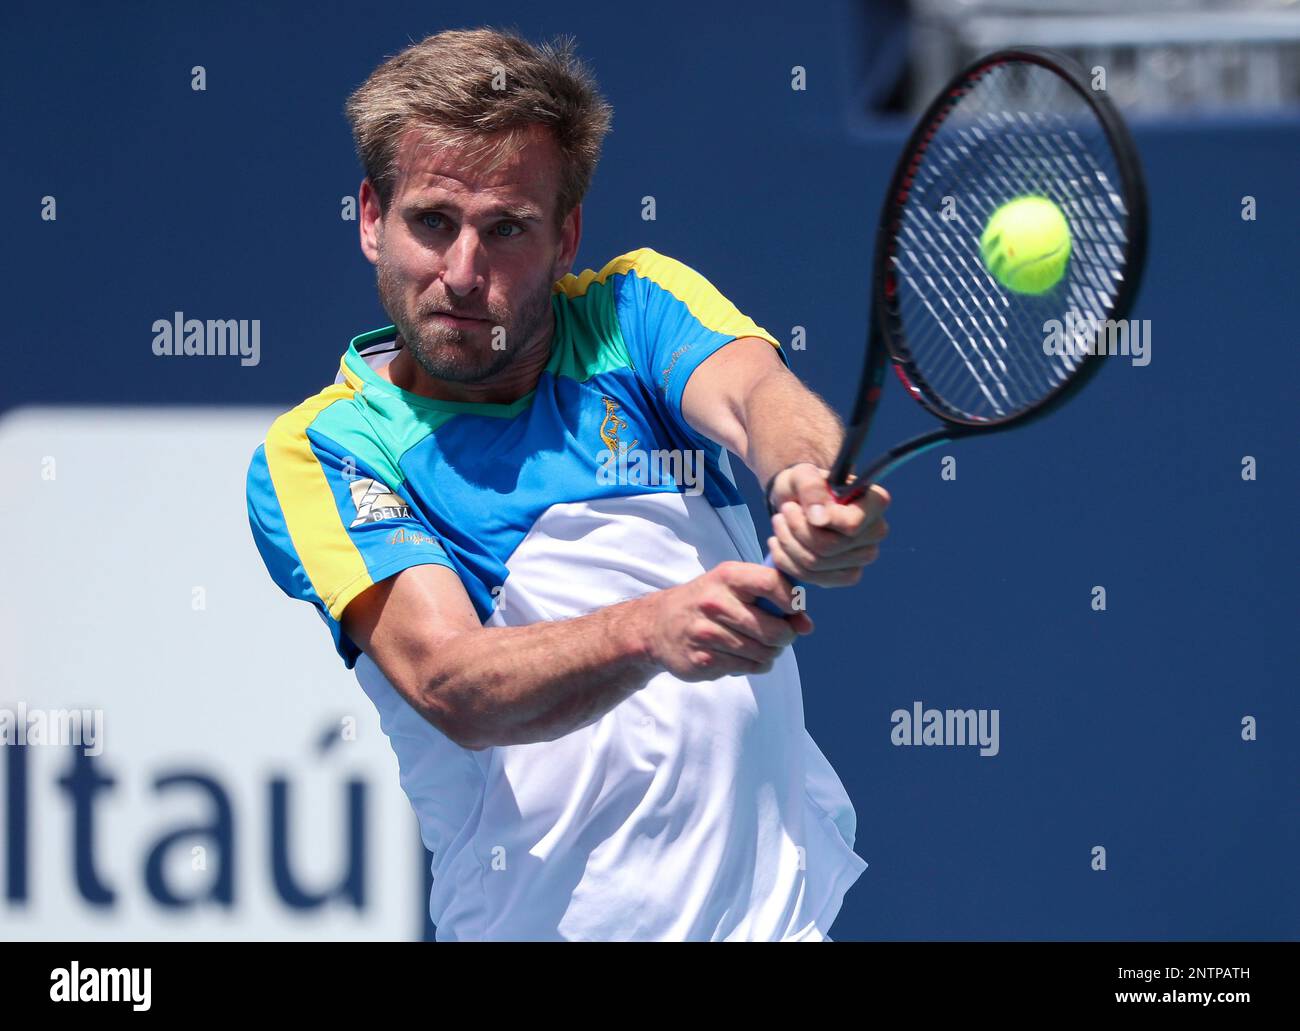 March 20, 2019: Peter Gojowczyk, of Germany, plays a backhand against  Federico Delbonis, of Argentina, at the 2019 Miami Open Presented by Itau  professional tennis tournament, played at Hardrock Stadium in Miami